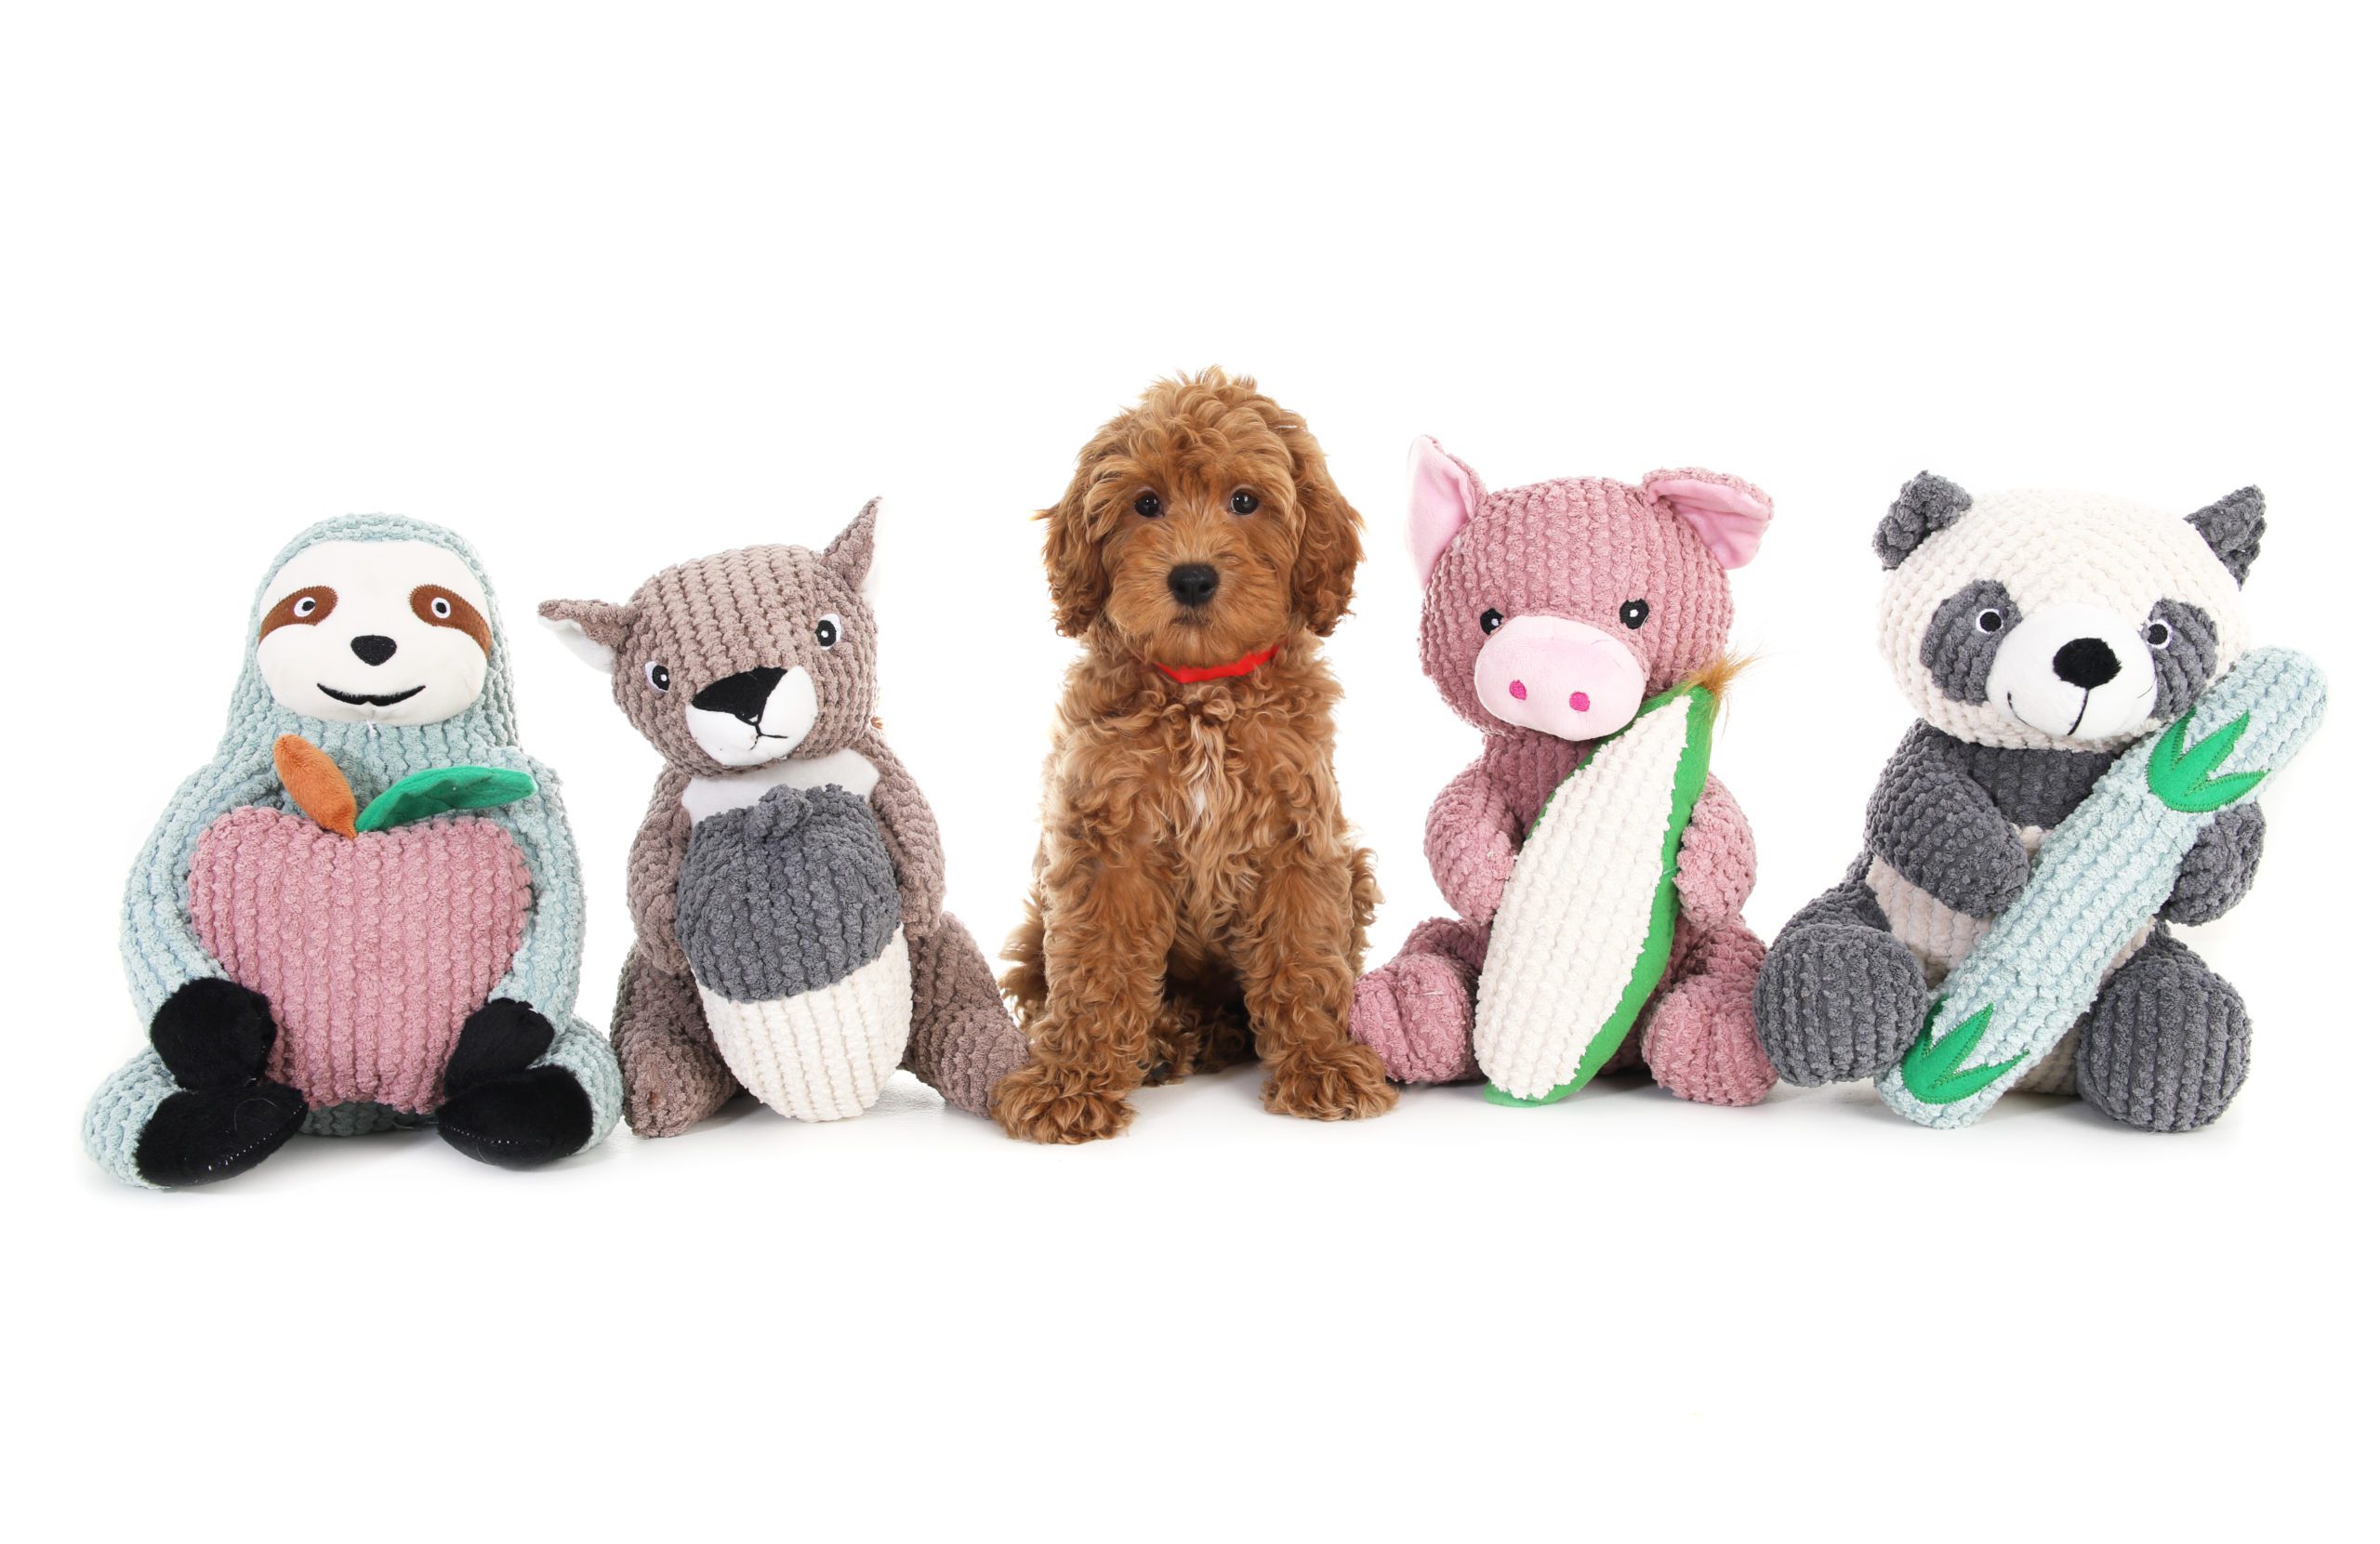 red goldendoodle puppy with stuffed animal friends